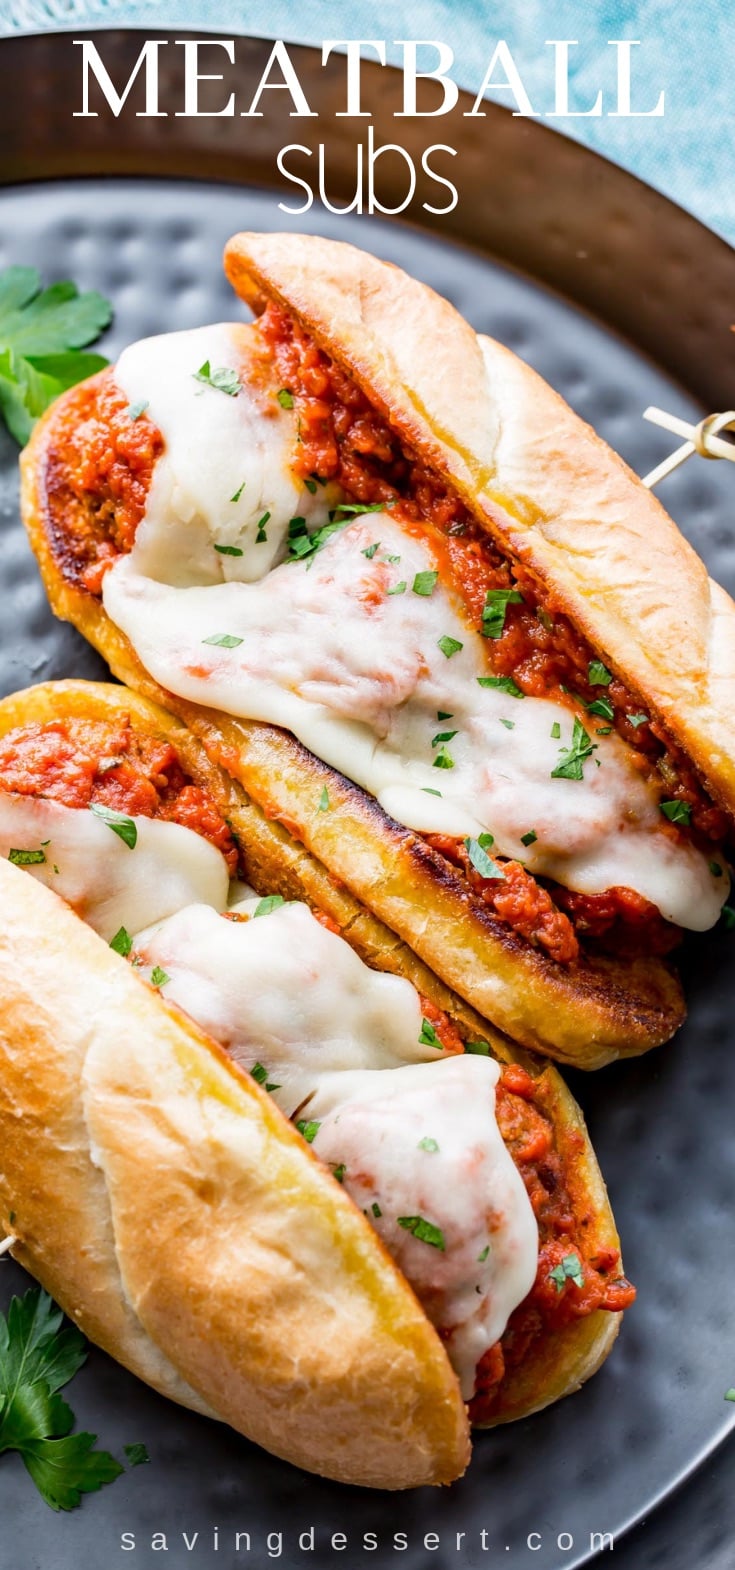 Easy, cheesy and delicious, homemade Meatball Sub Sandwiches are sure to satisfy and so much better than you can get in a restaurant! #meatball #subsandwich #sandwich #meatballsub #submarinesandwich 